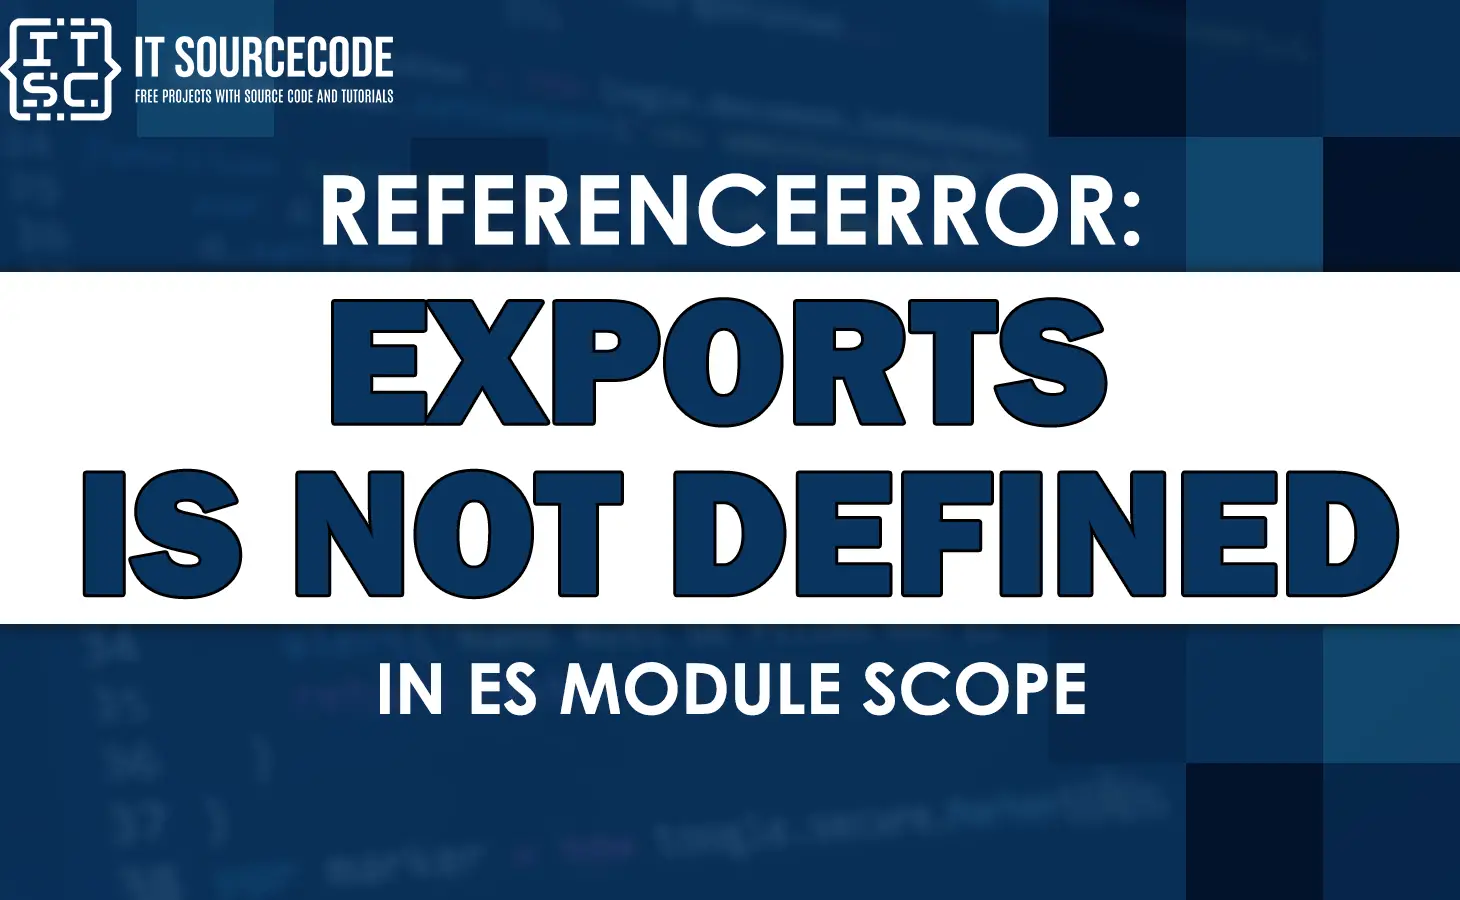 referenceerror exports is not defined in es module scope